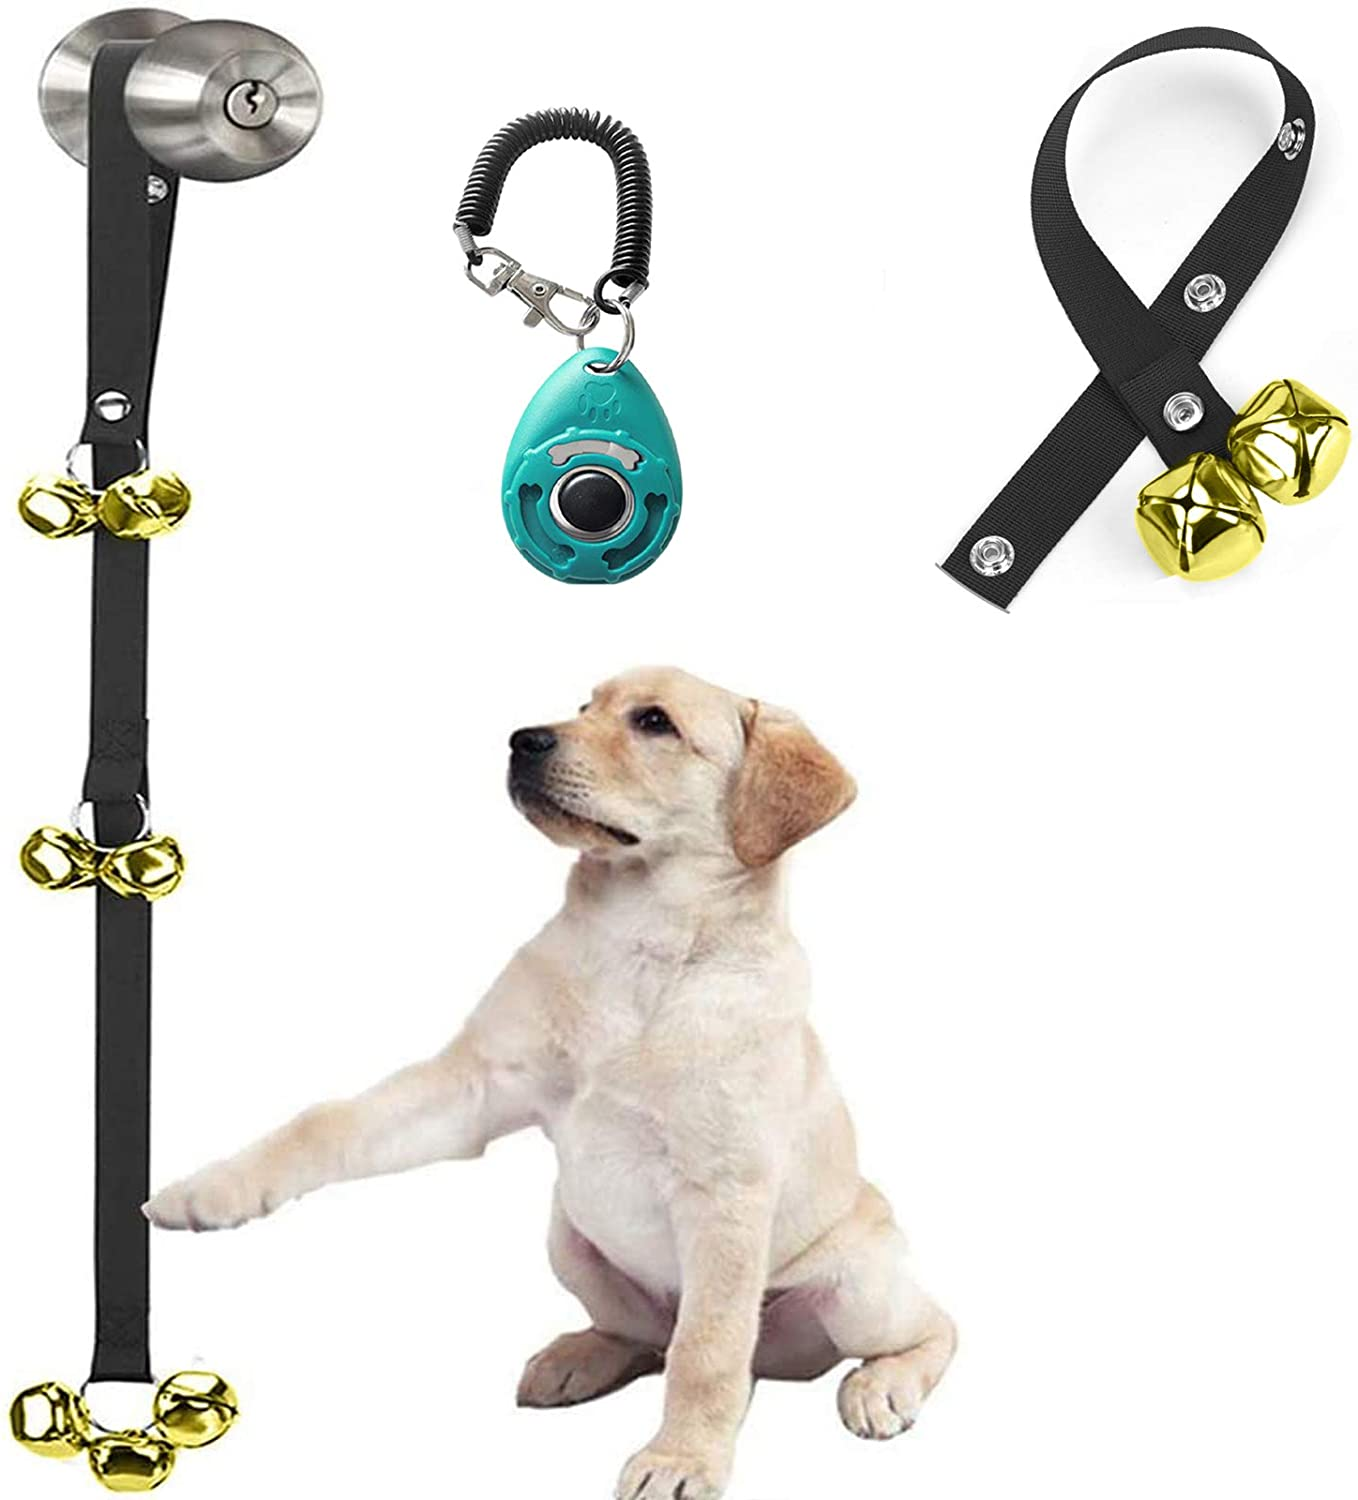 Pack of 2 Upgraded Puppy Bells Doorbells for Door Knob, Dog Bells for Potty Training-Louder Jingle, Bigger Bells for Puppies Pep Doggy Canine Pooch Pet Hound Cat, Cool Unique Gift for Dog Lover